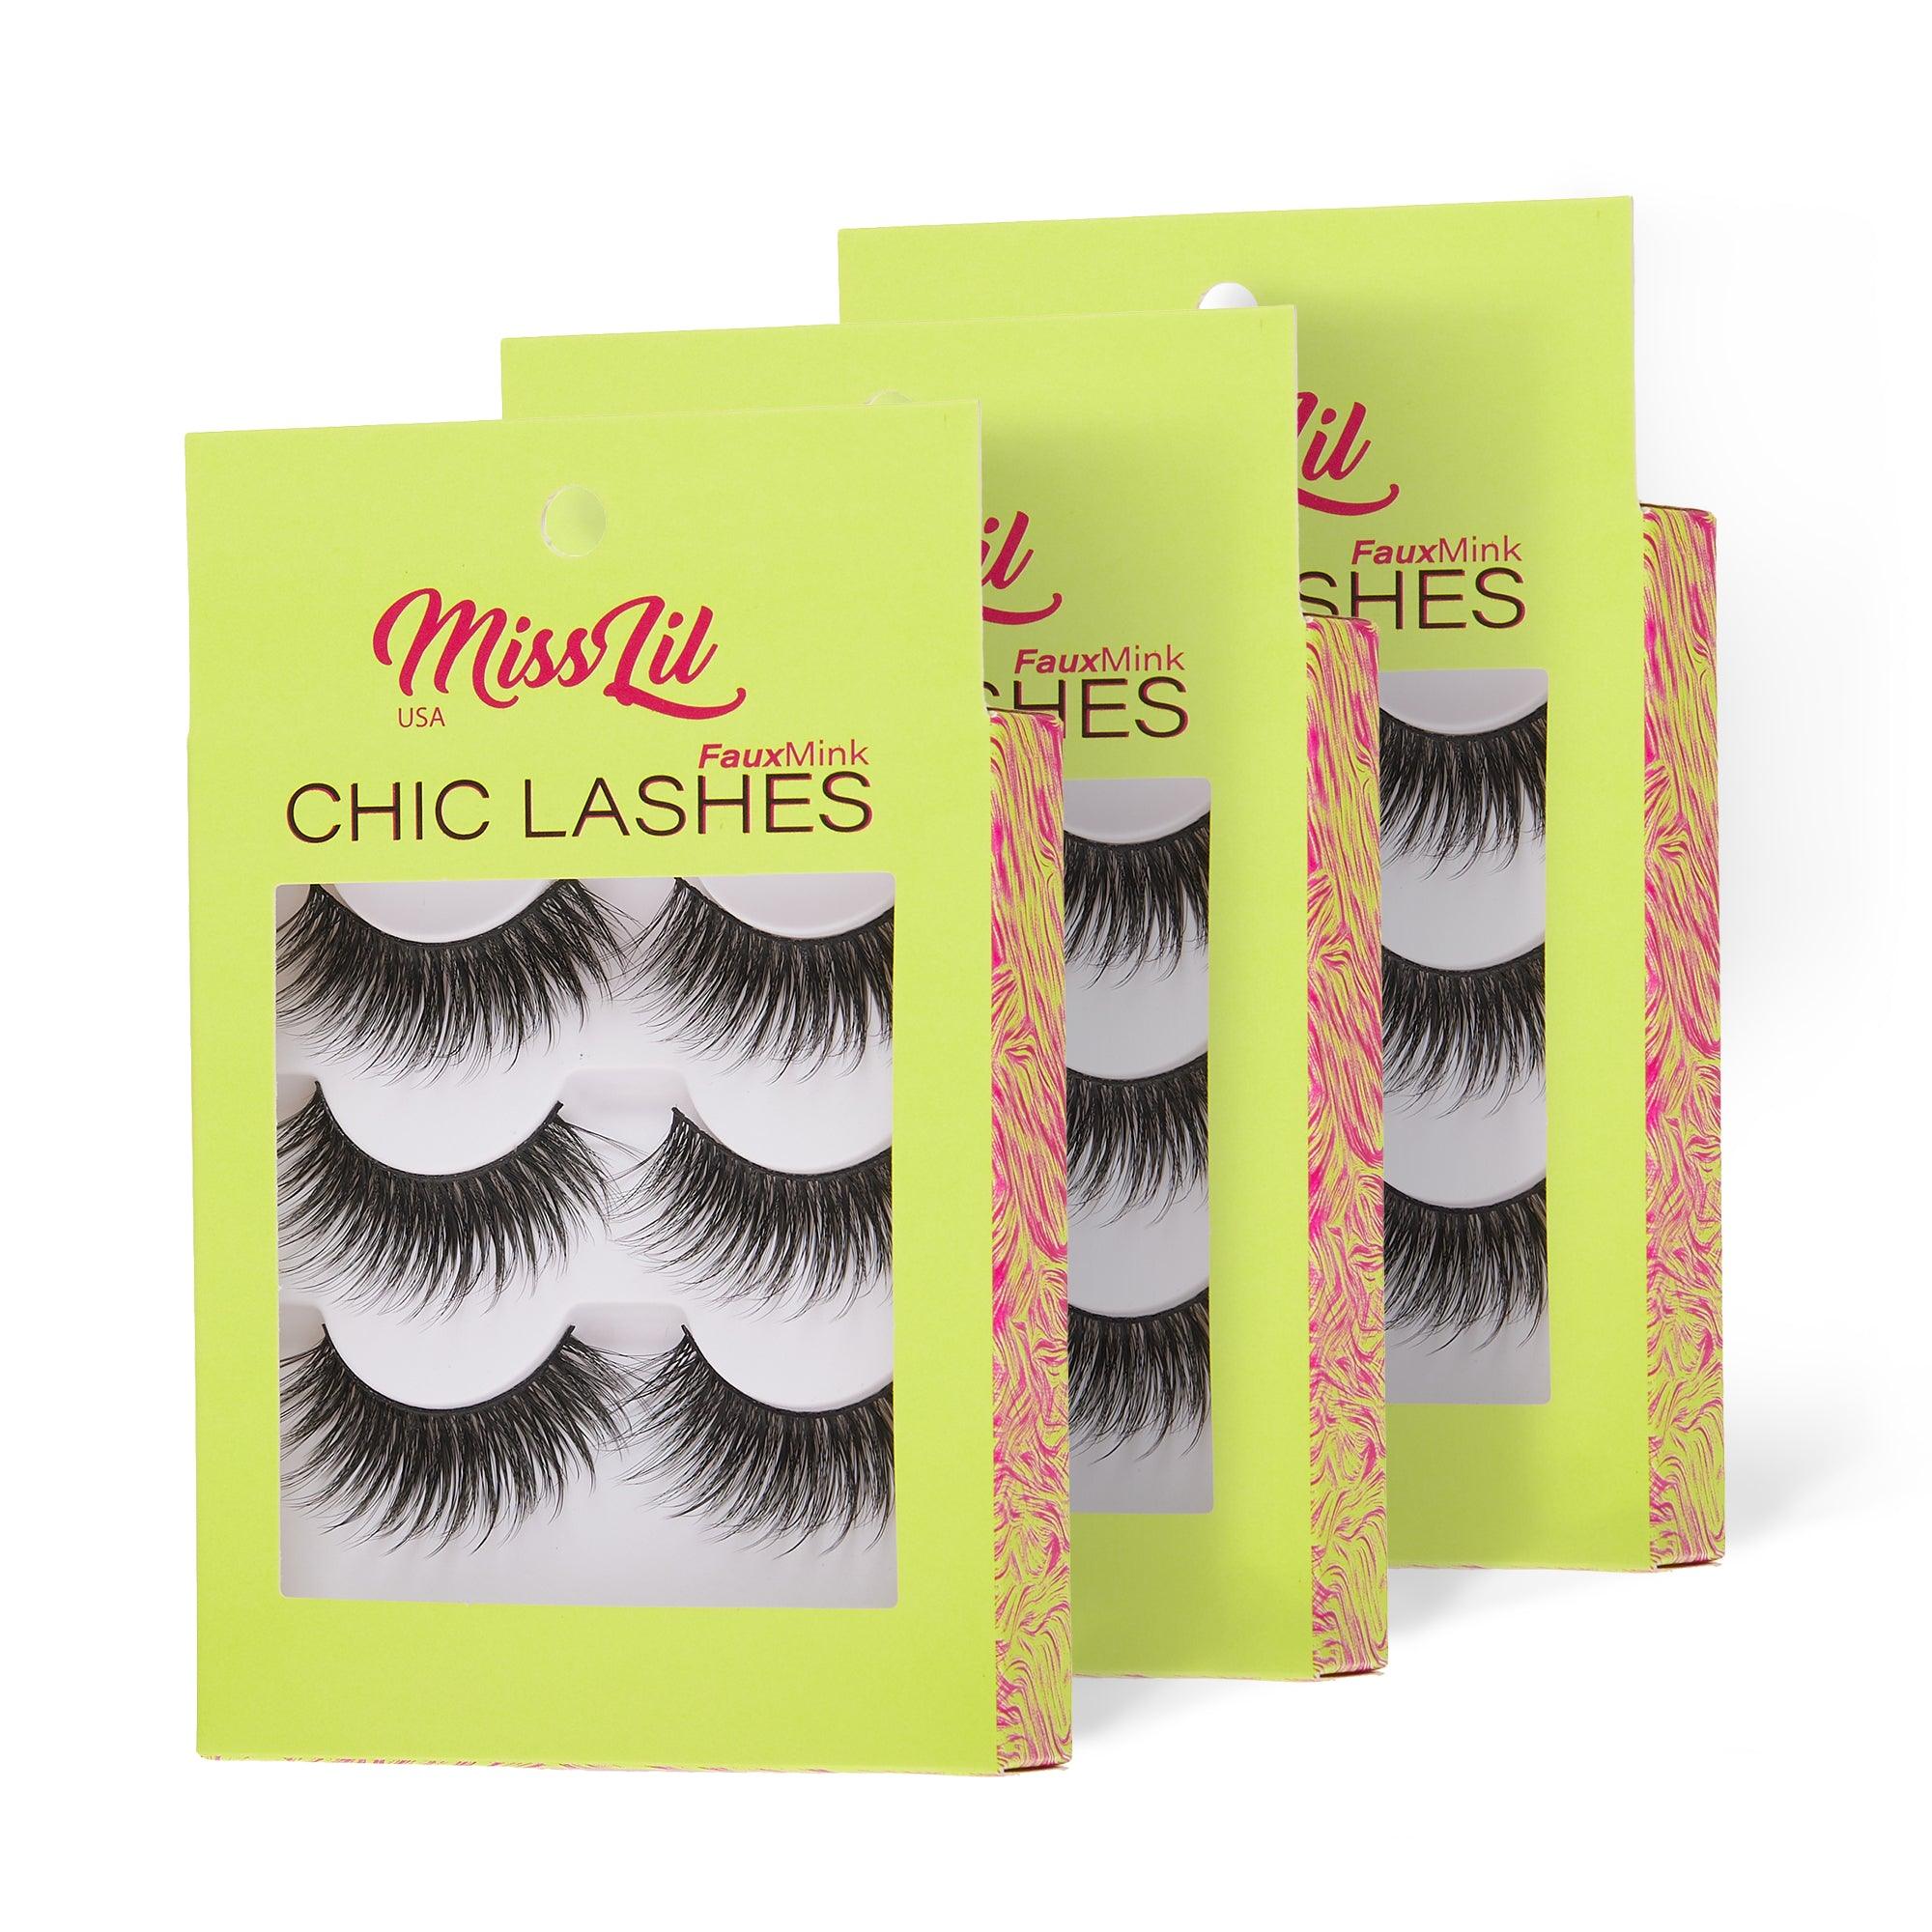 3-Pairs Lashes-Chic Lashes Collection #30 (Pack of 12) - Miss Lil USA Wholesale